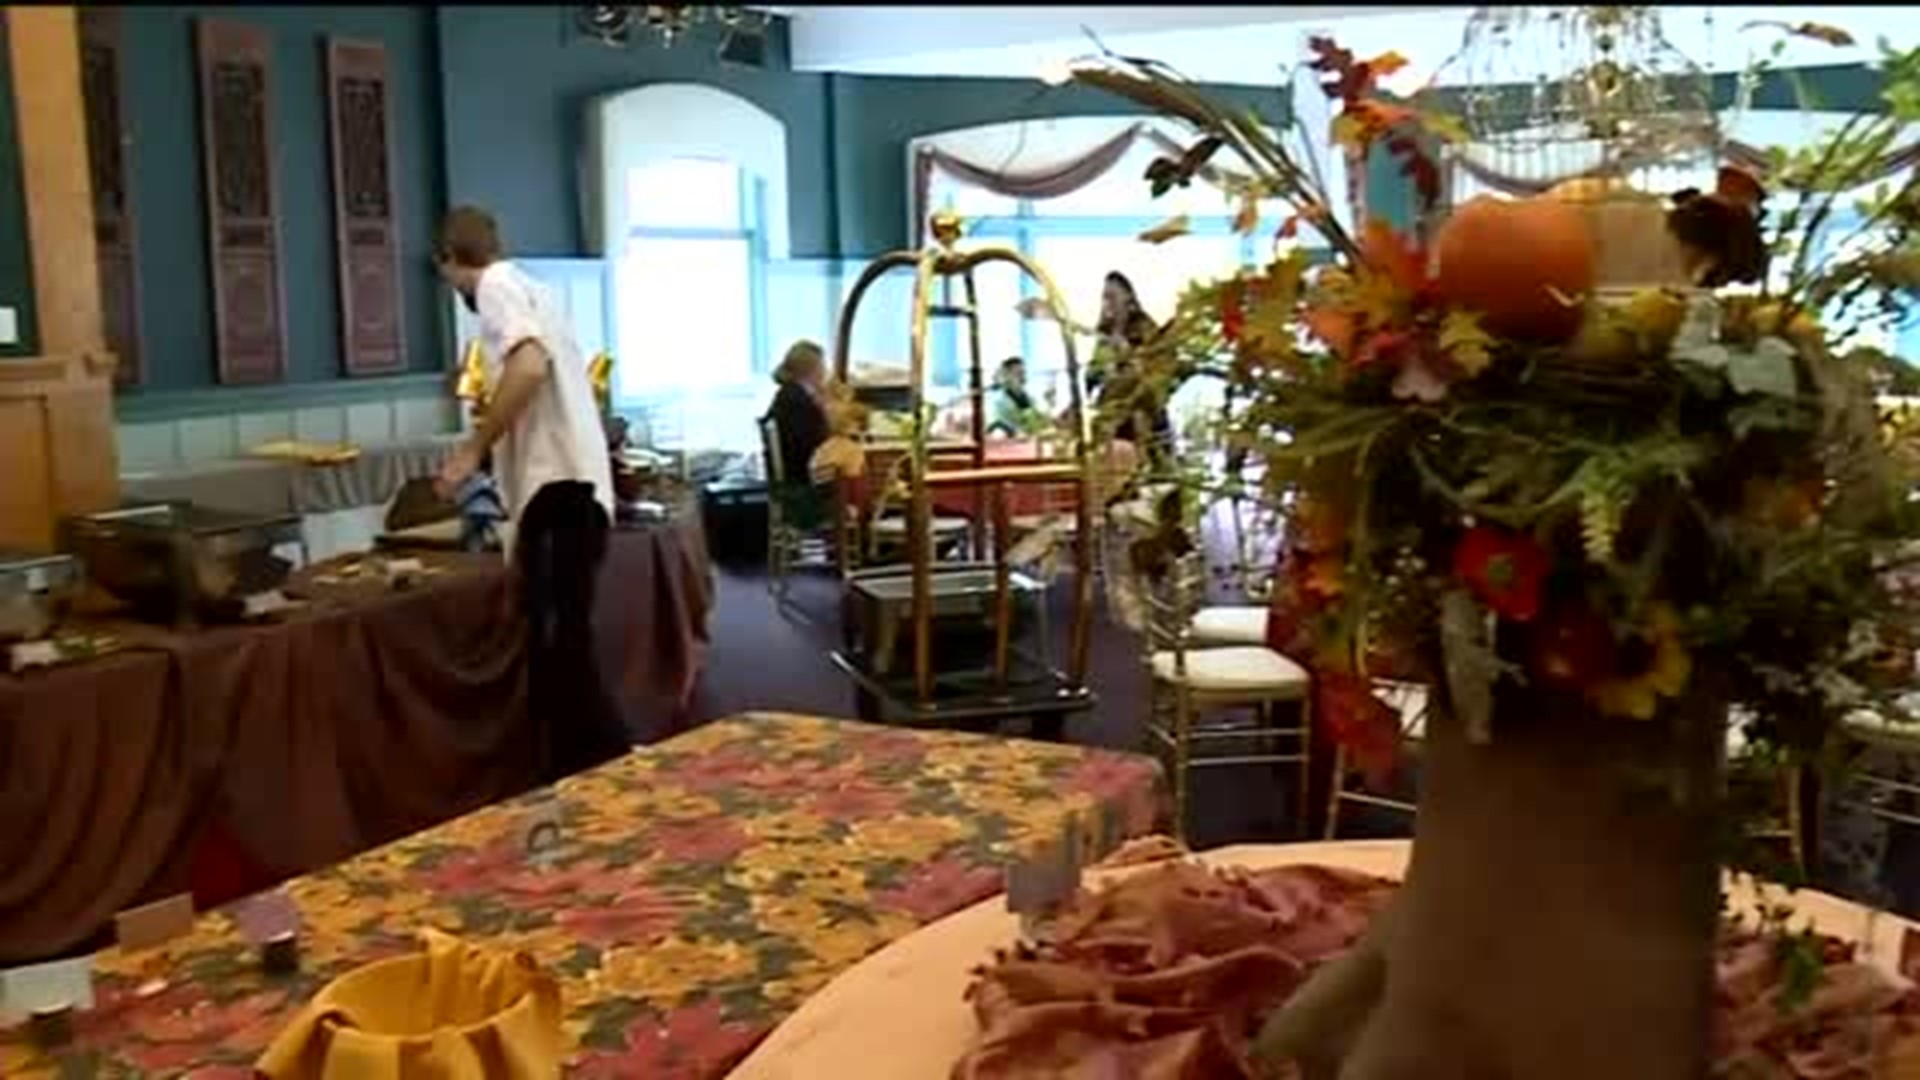 Resorts in the Poconos Busy for Thanksgiving